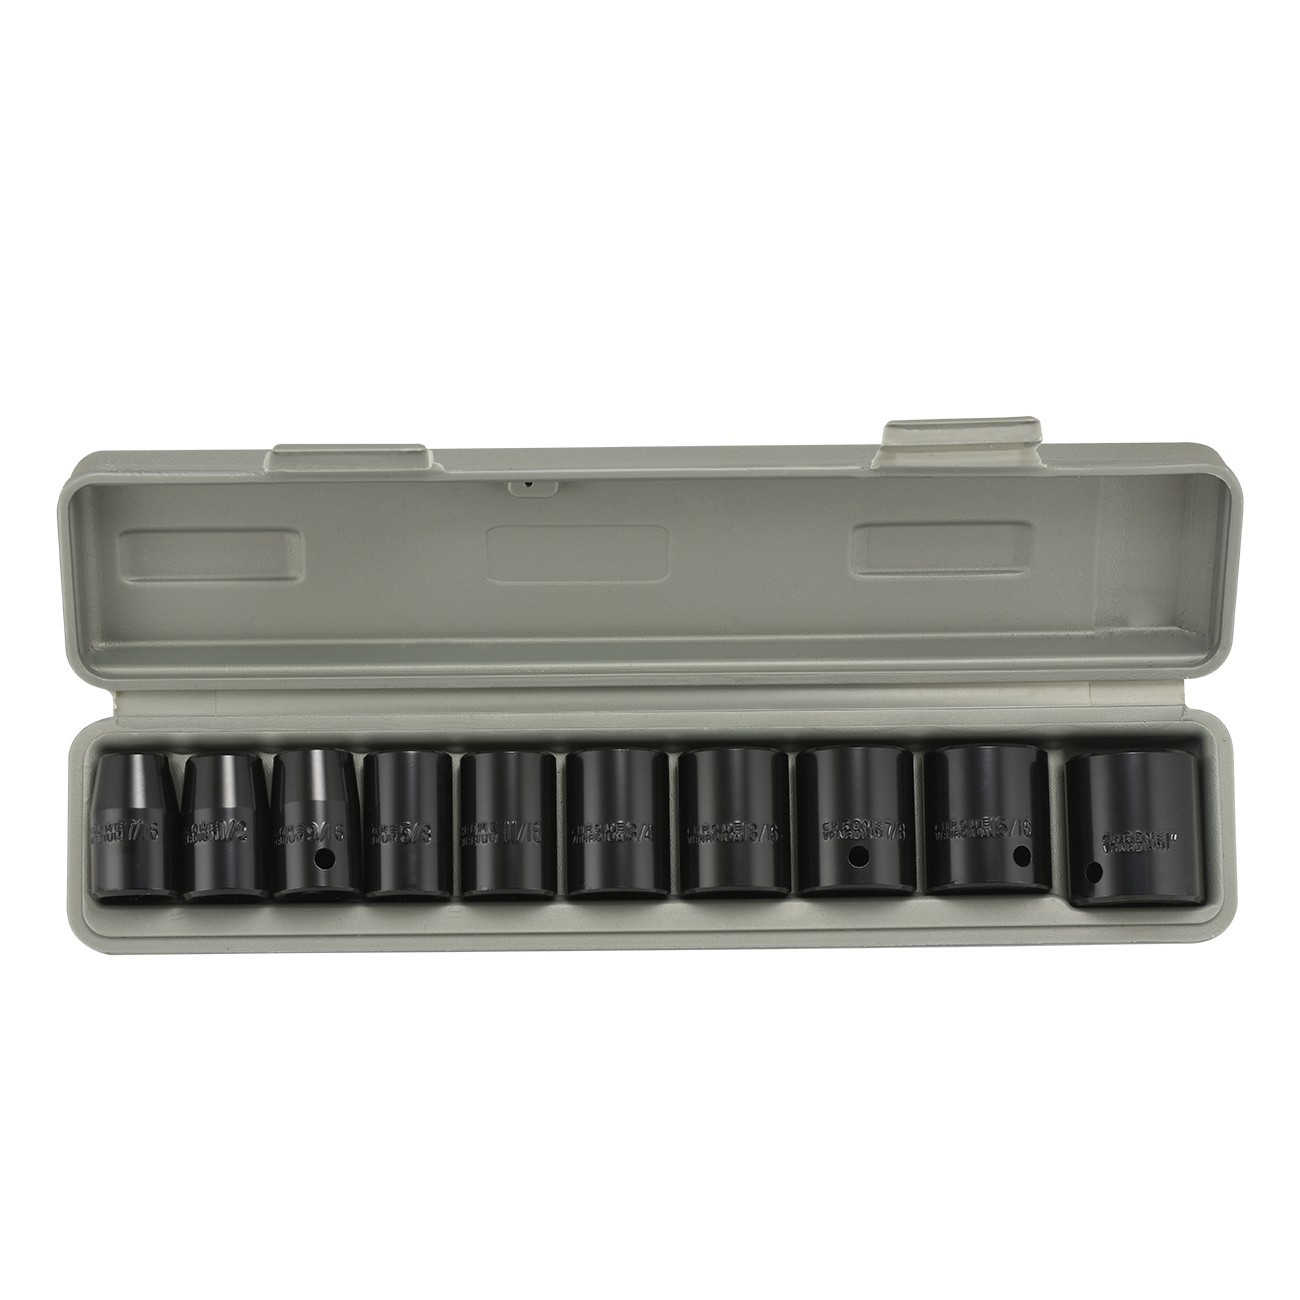 1/2' Dr Metric Impact Socket Wrench Set with Case